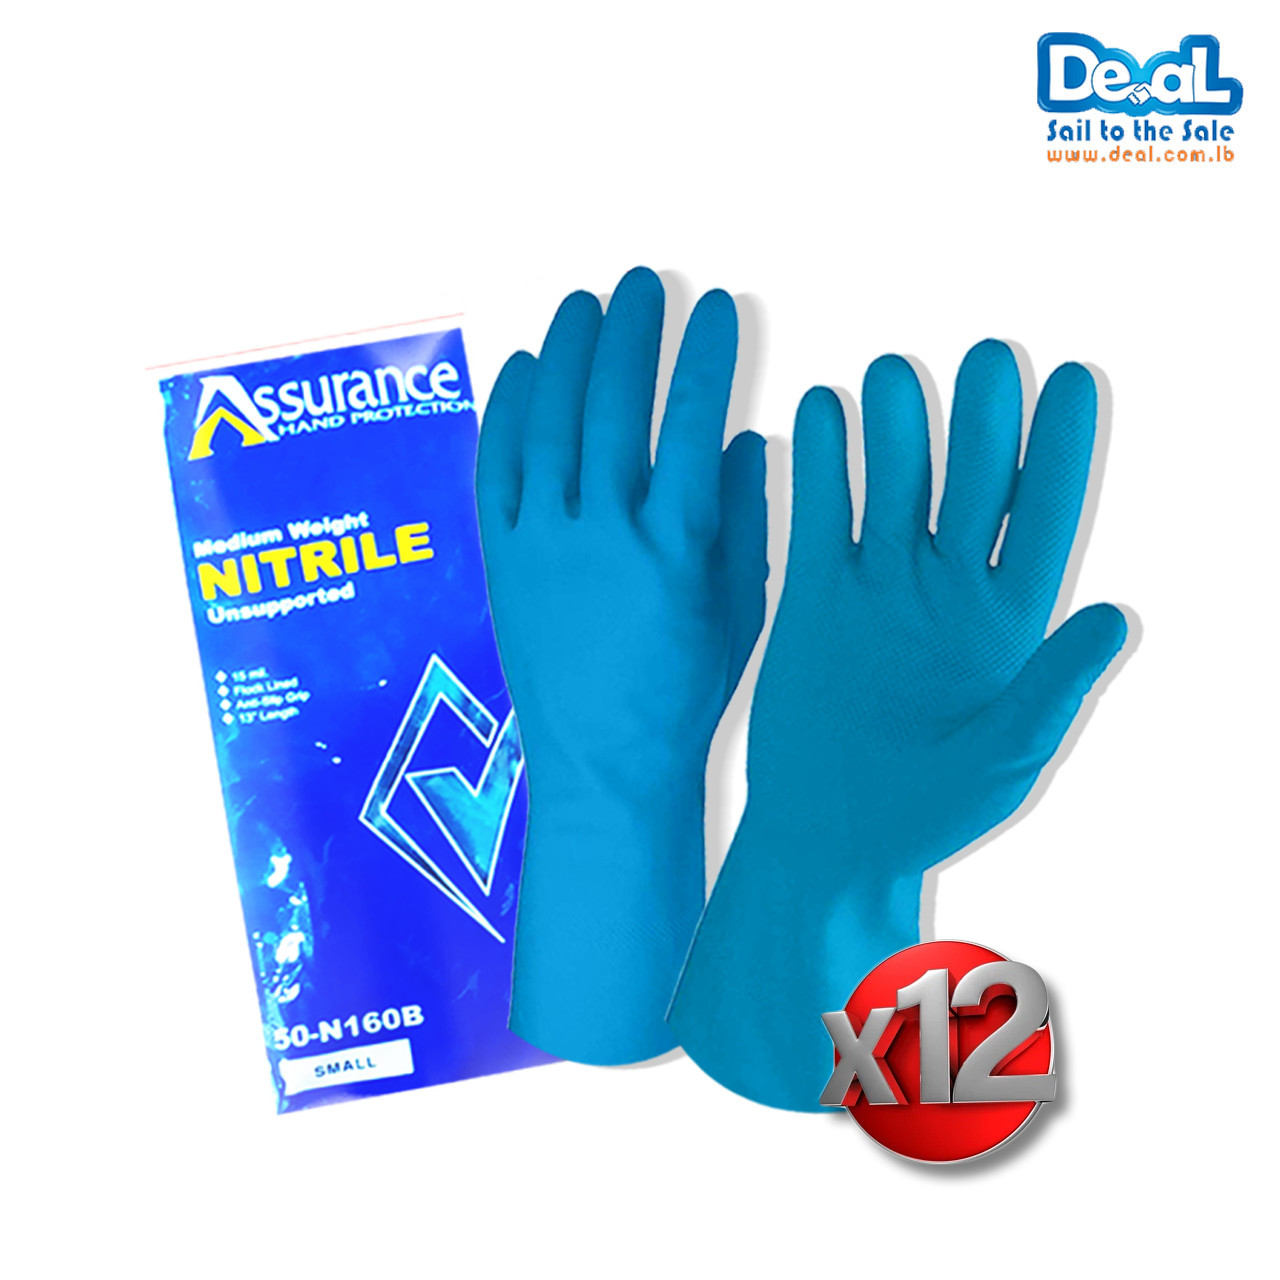 12 Pair Nitrile Protective Thick Hand Gloves Small Size